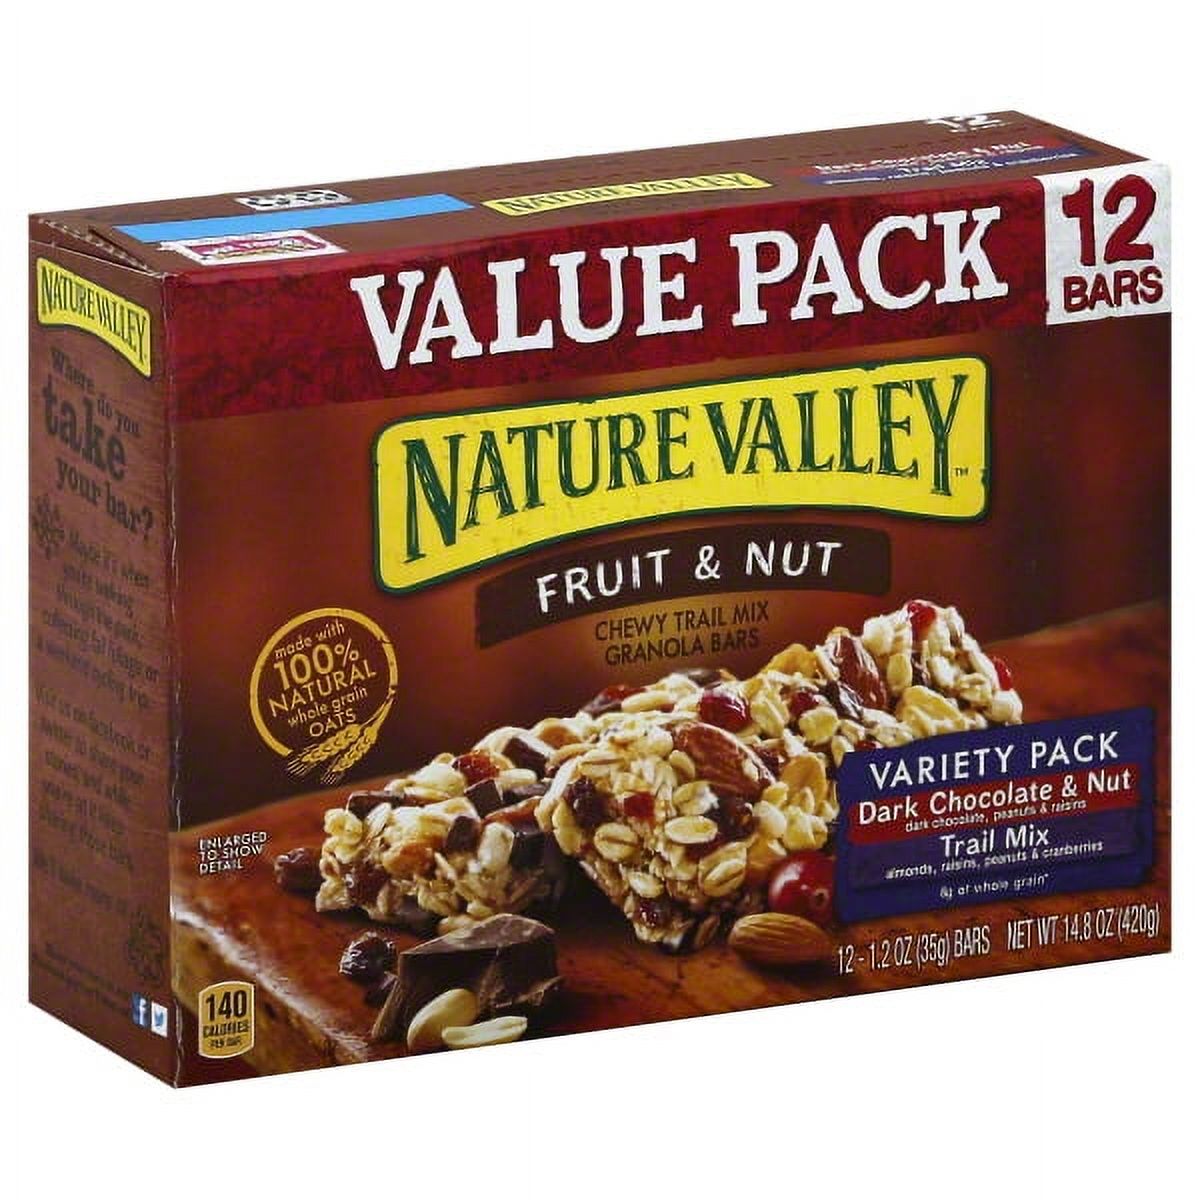 Nature Valley Chewy Granola Bar Trail Mix Variety Pack of Dark Chocolate & Nut and Fruit & Nut 12 - 1.2 oz Bars - image 1 of 6